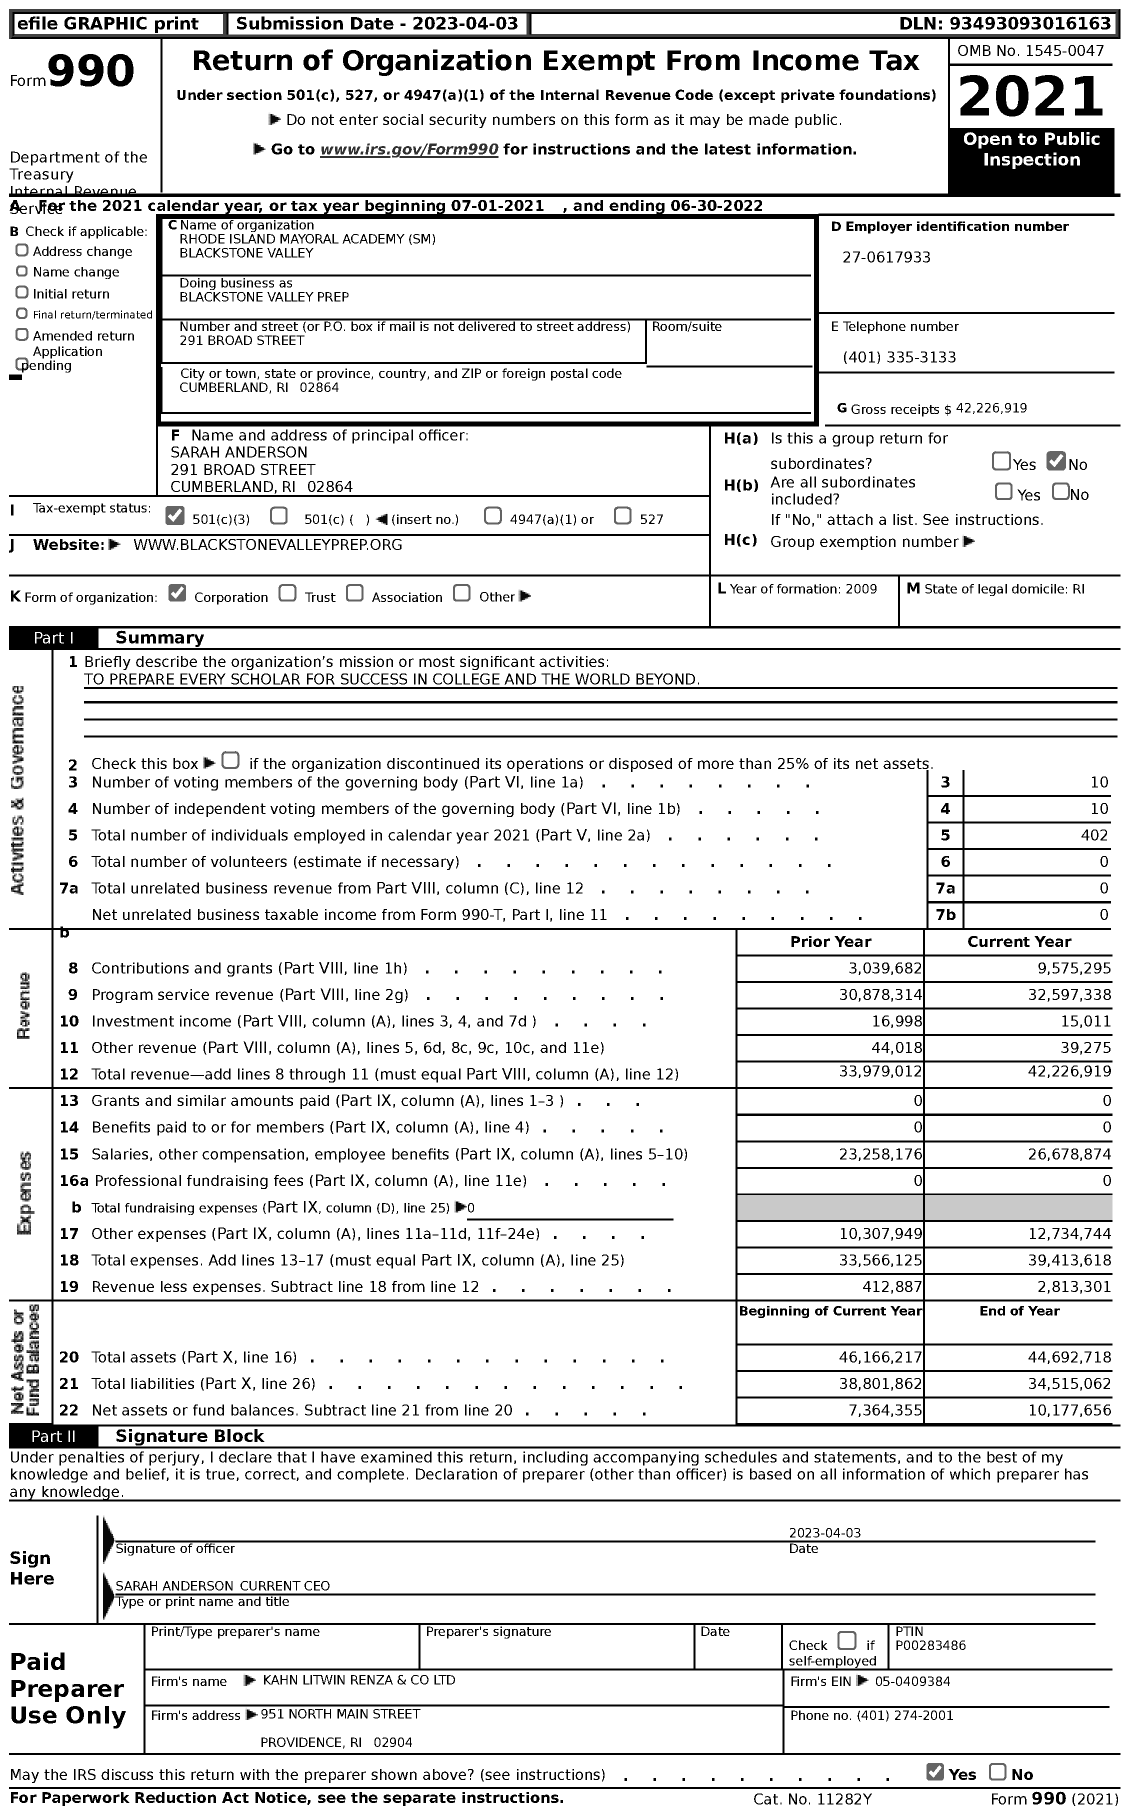 Image of first page of 2021 Form 990 for Blackstone Valley Prep